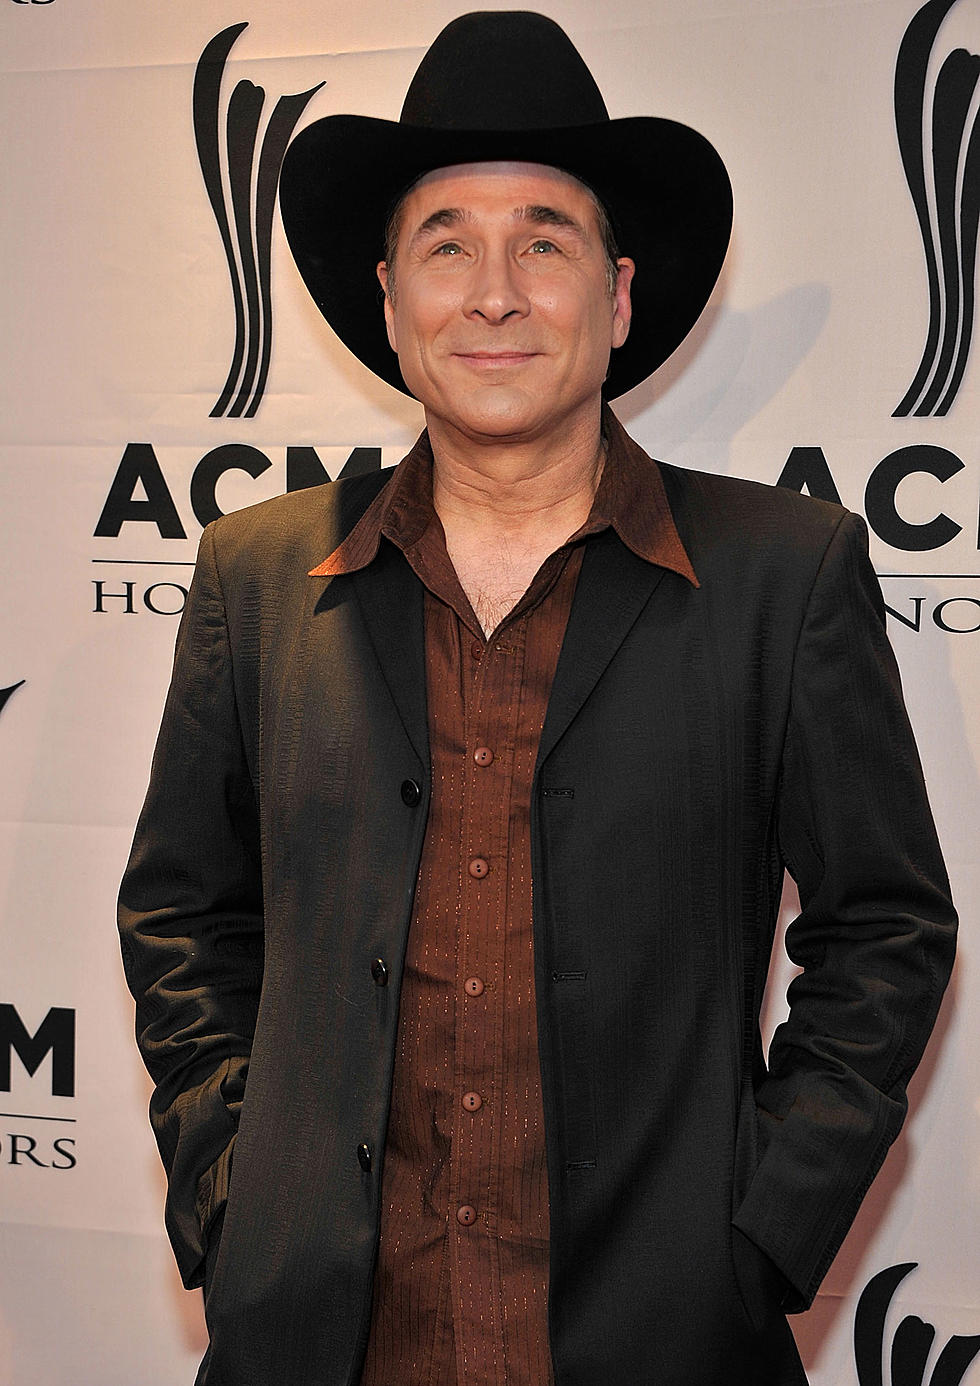 Clint Black is Coming To Abilene for the REHAB Summer Dinner Show in August